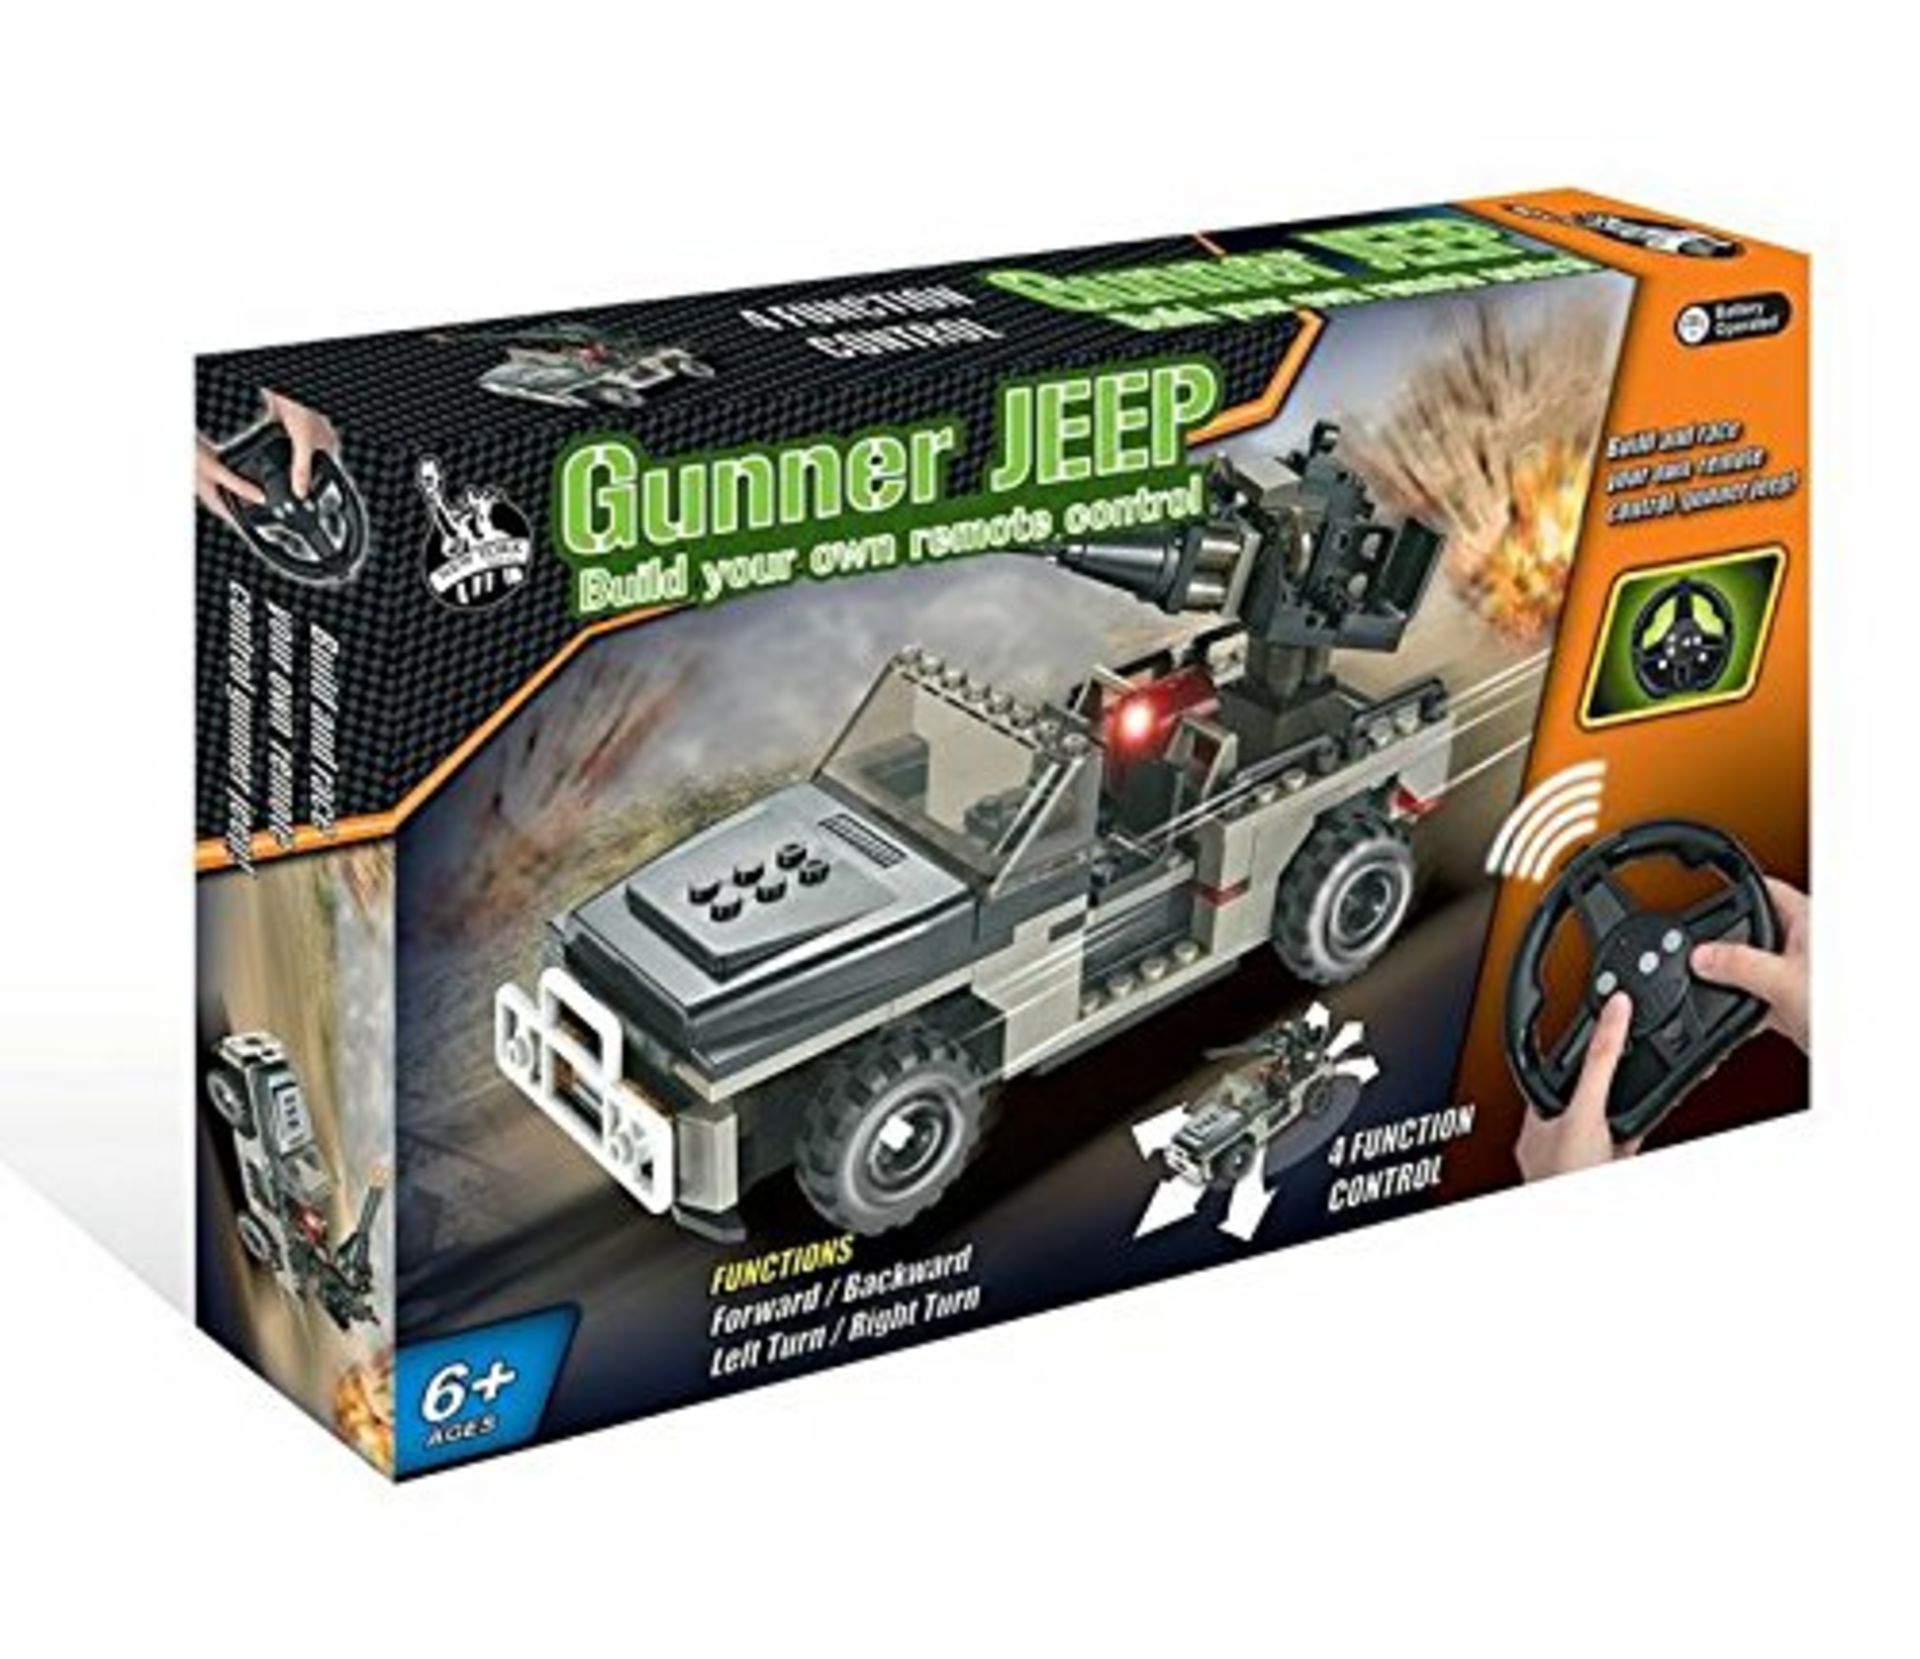 V *TRADE QTY* Brand New Radio Controlled Build Your Own Lego Compatible Jeep With Mounted Gun